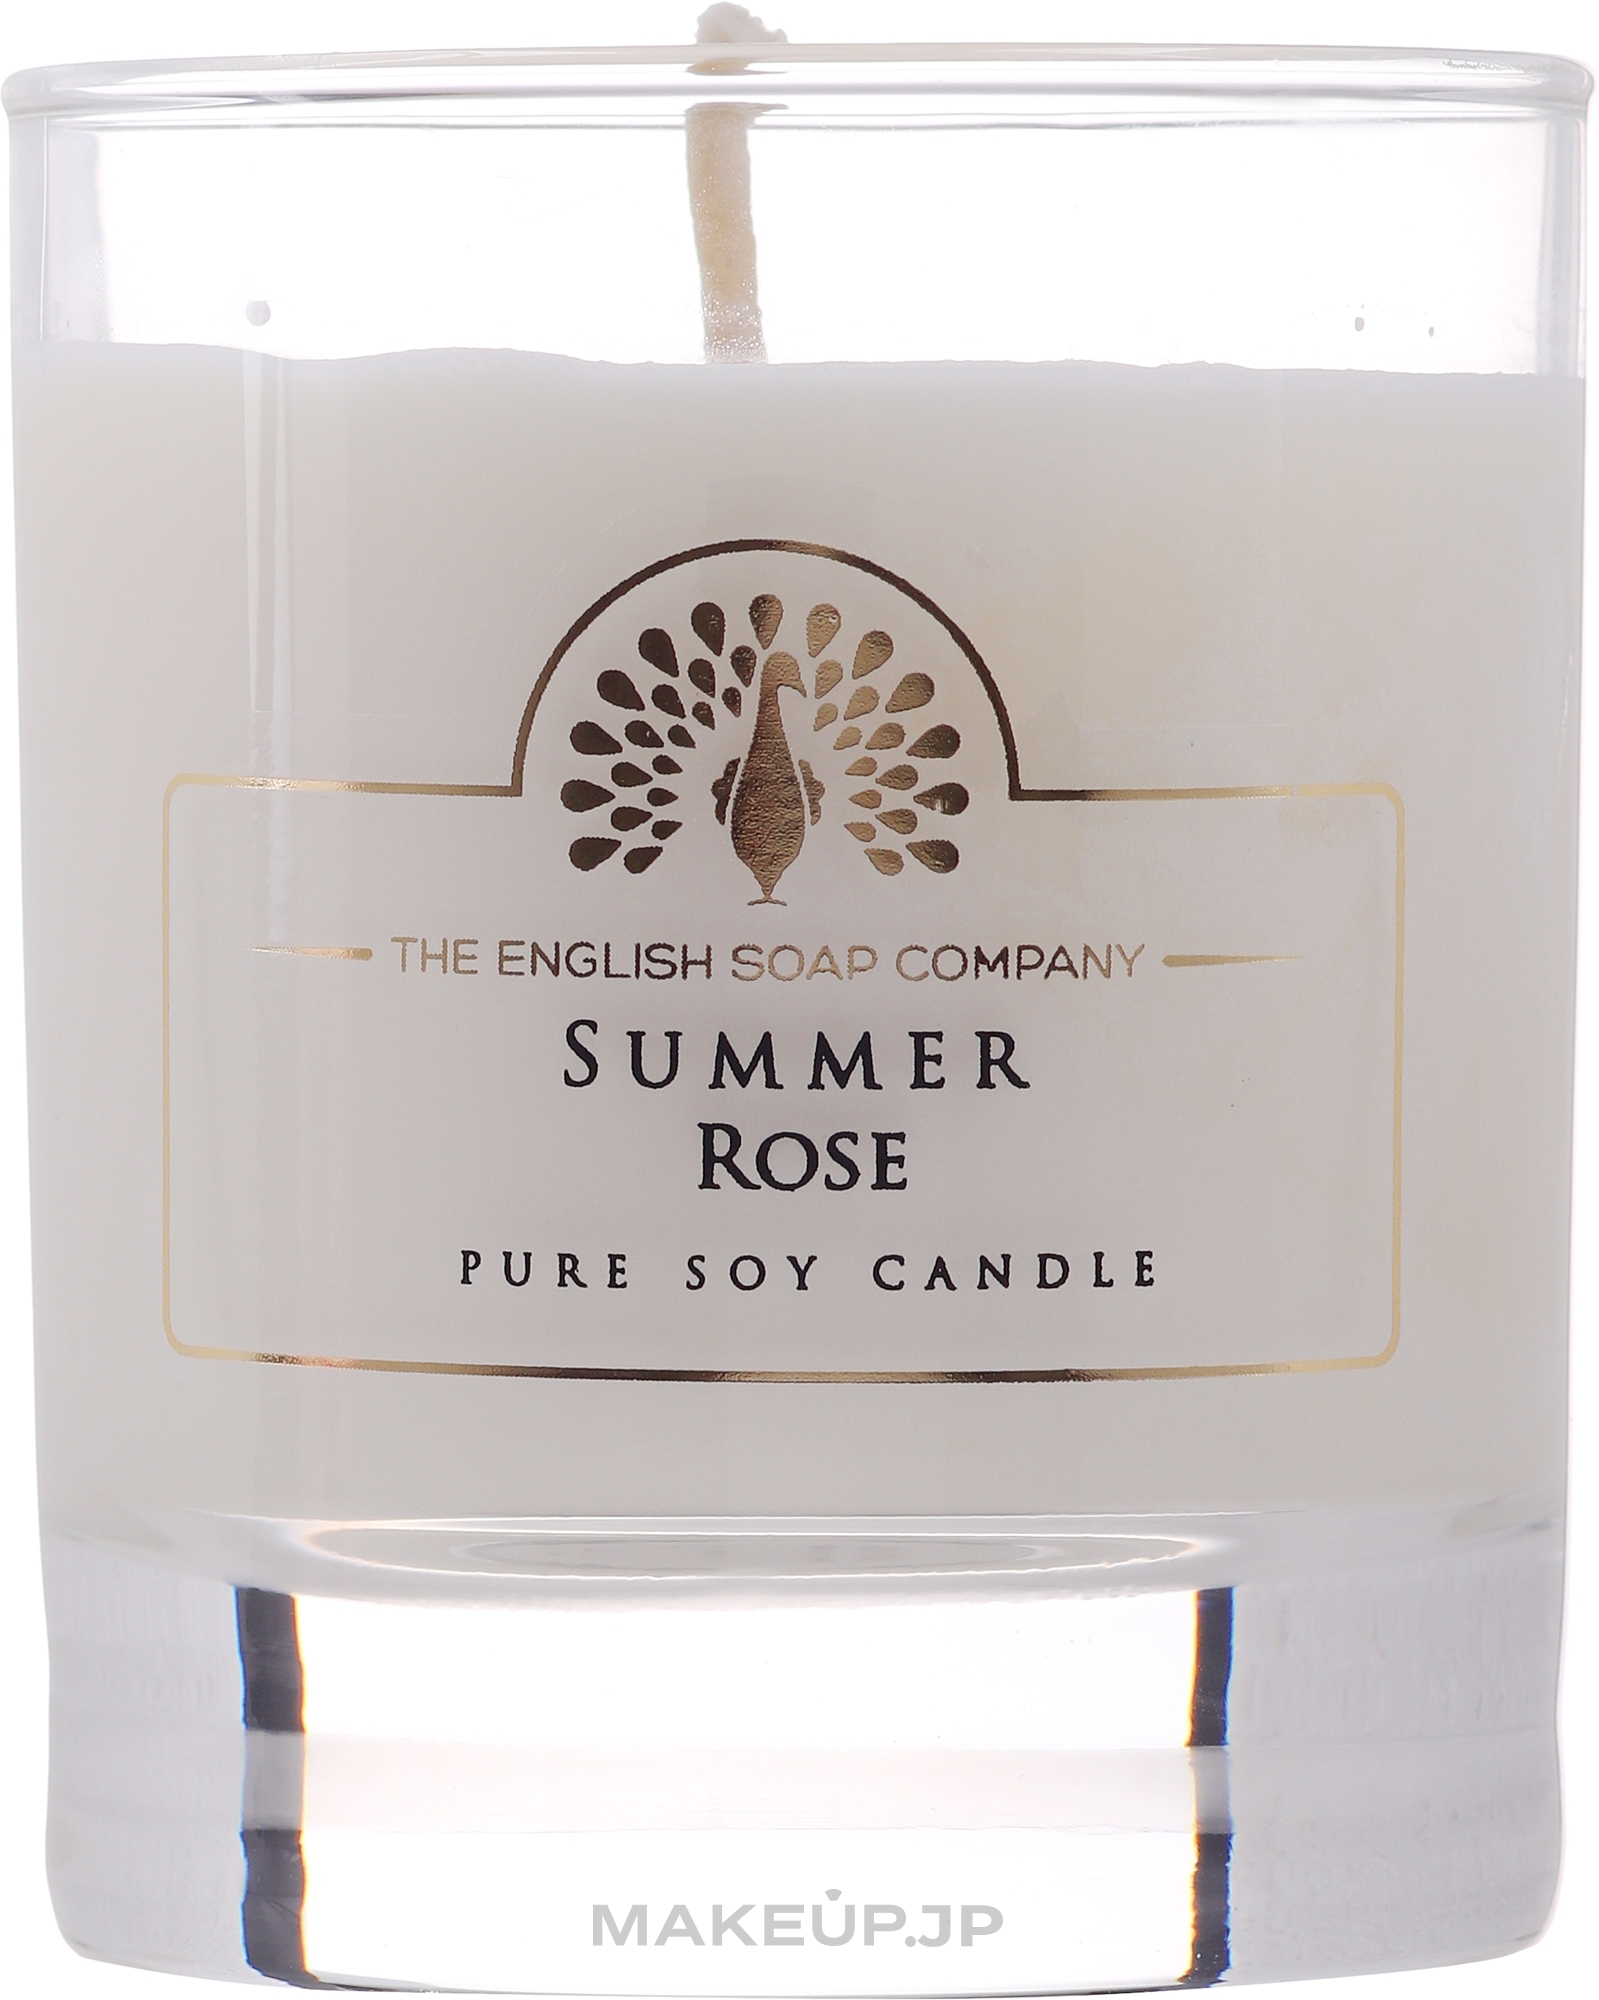 Scented Candle - The English Soap Company Summer Rose Candle — photo 170 ml